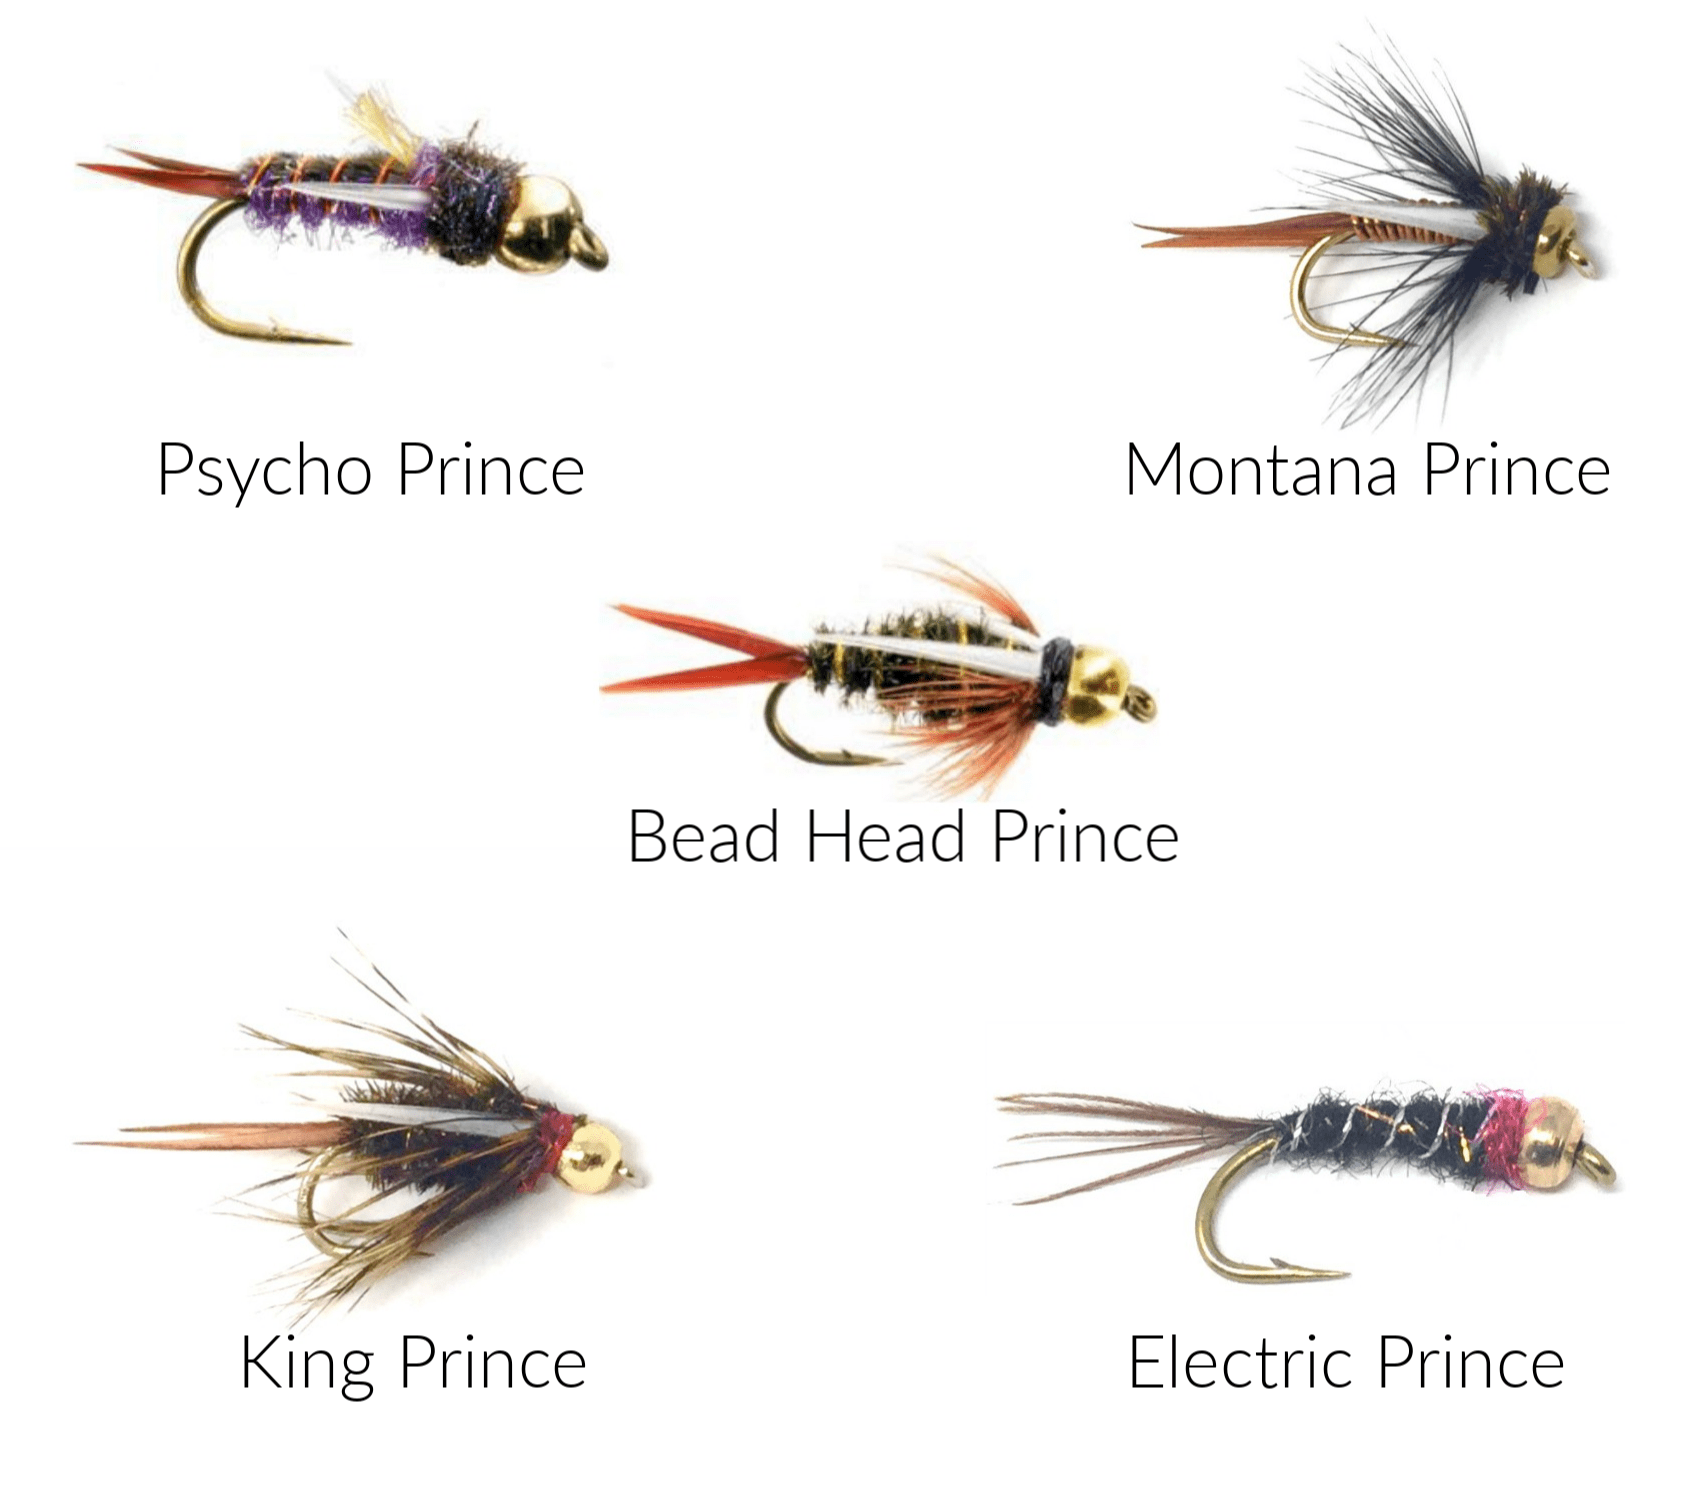 Rubber Legs RiverBum Prince Nymph Assortment Kit with Fly Box Bead Head Psycho Prince 30 Piece